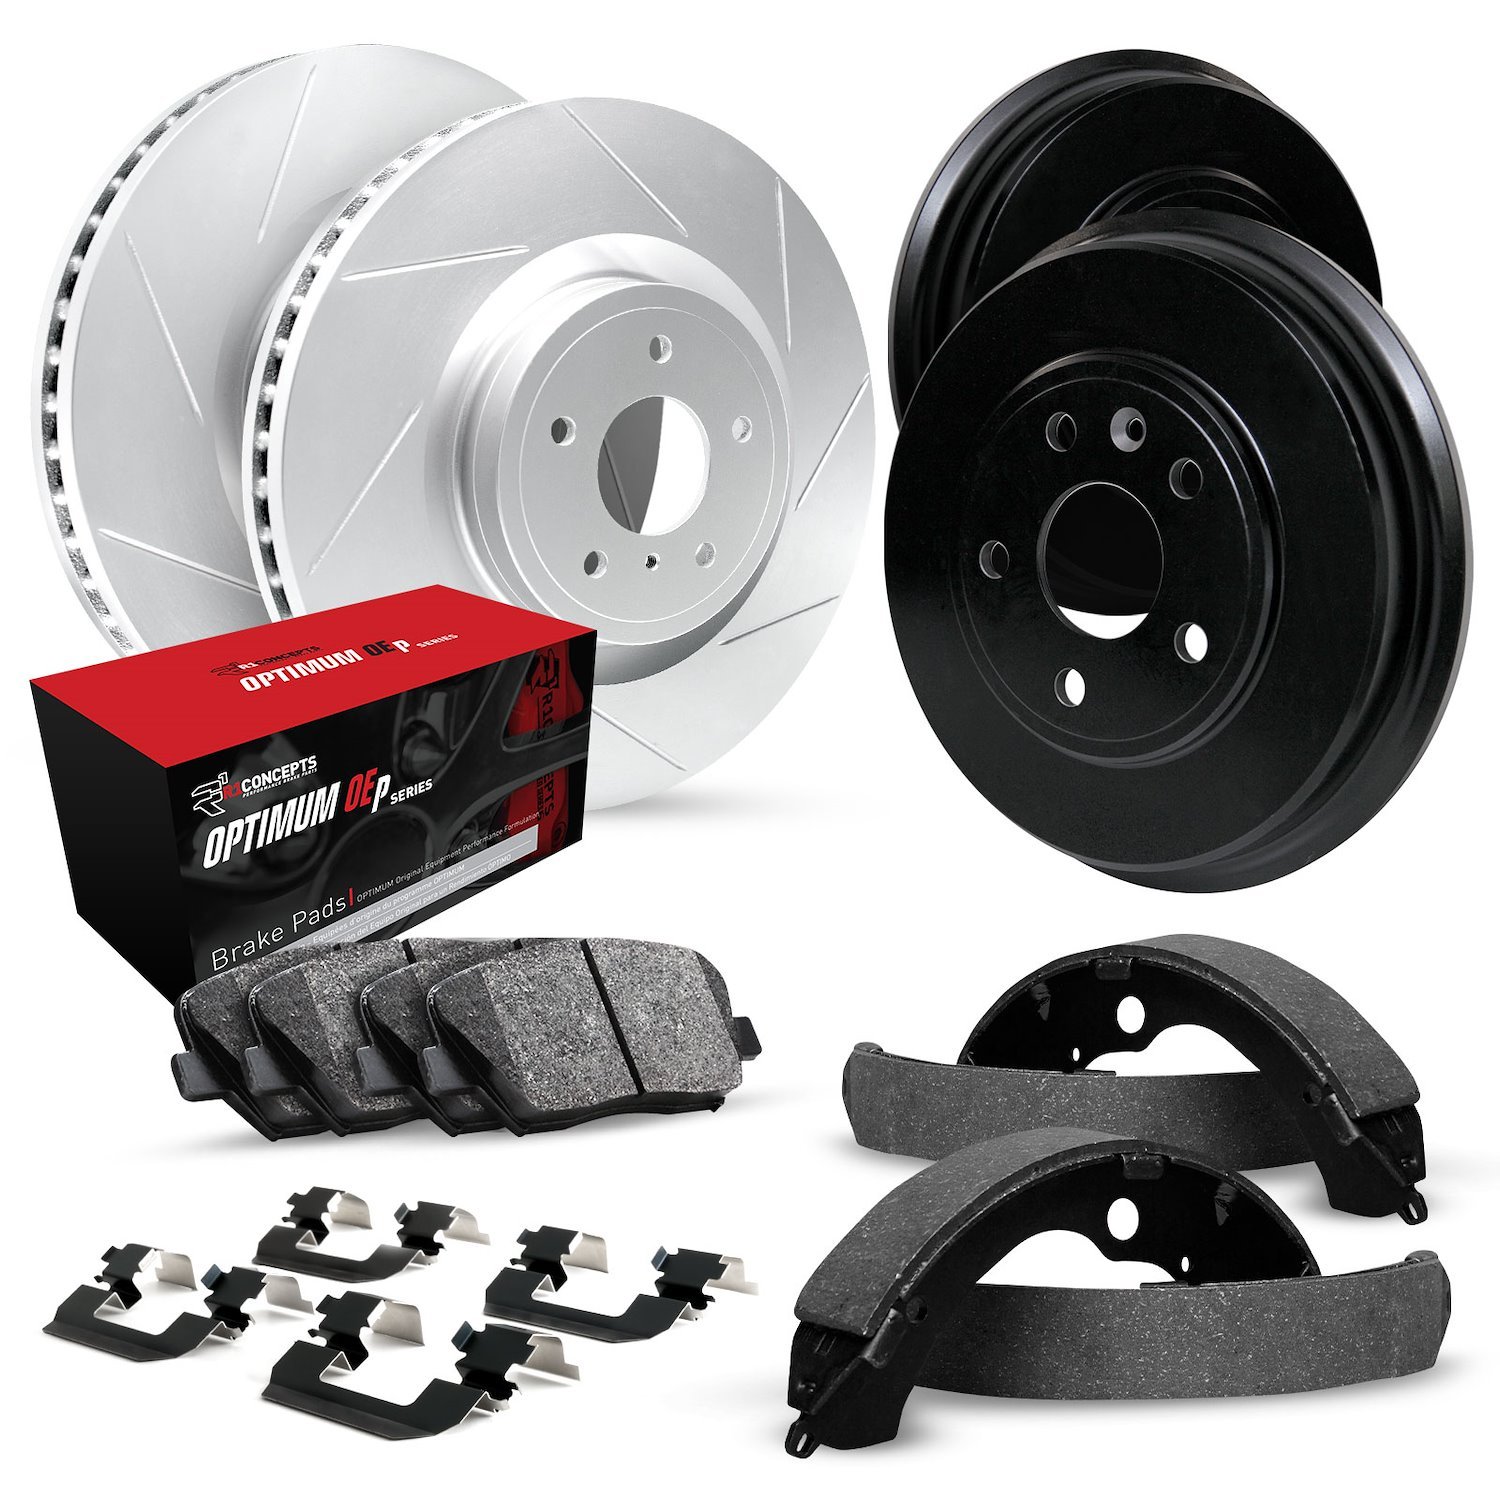 GEO-Carbon Slotted Brake Rotor & Drum Set w/Optimum OE Pads, Shoes, & Hardware, 2001-2005 GM, Position: Front & Rear